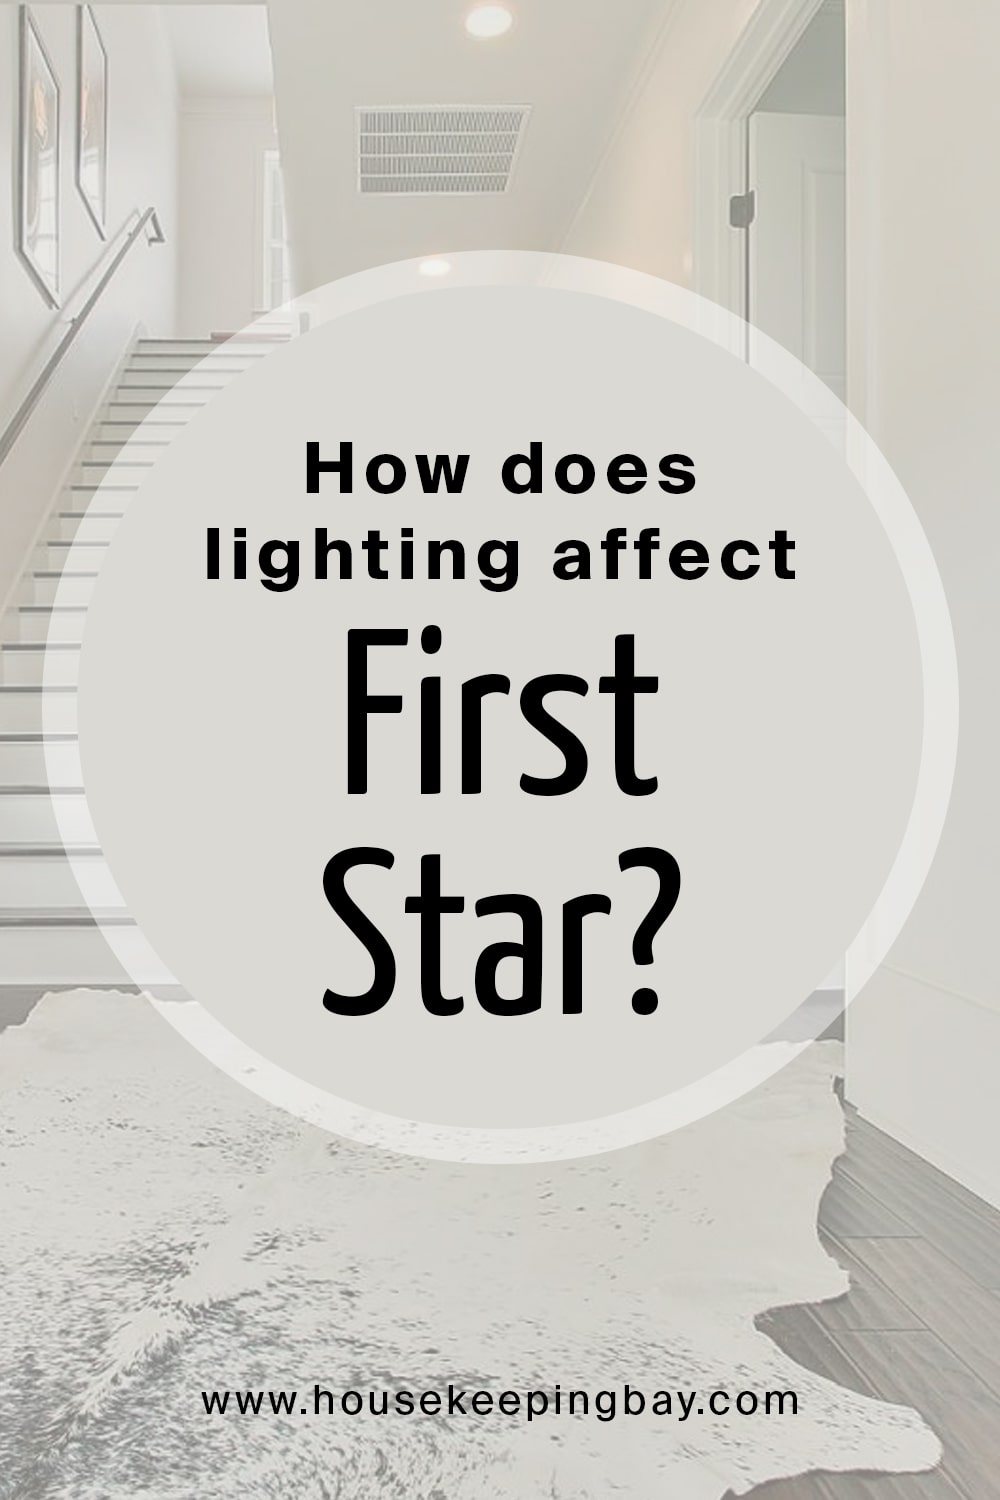 How does lighting affect First Star